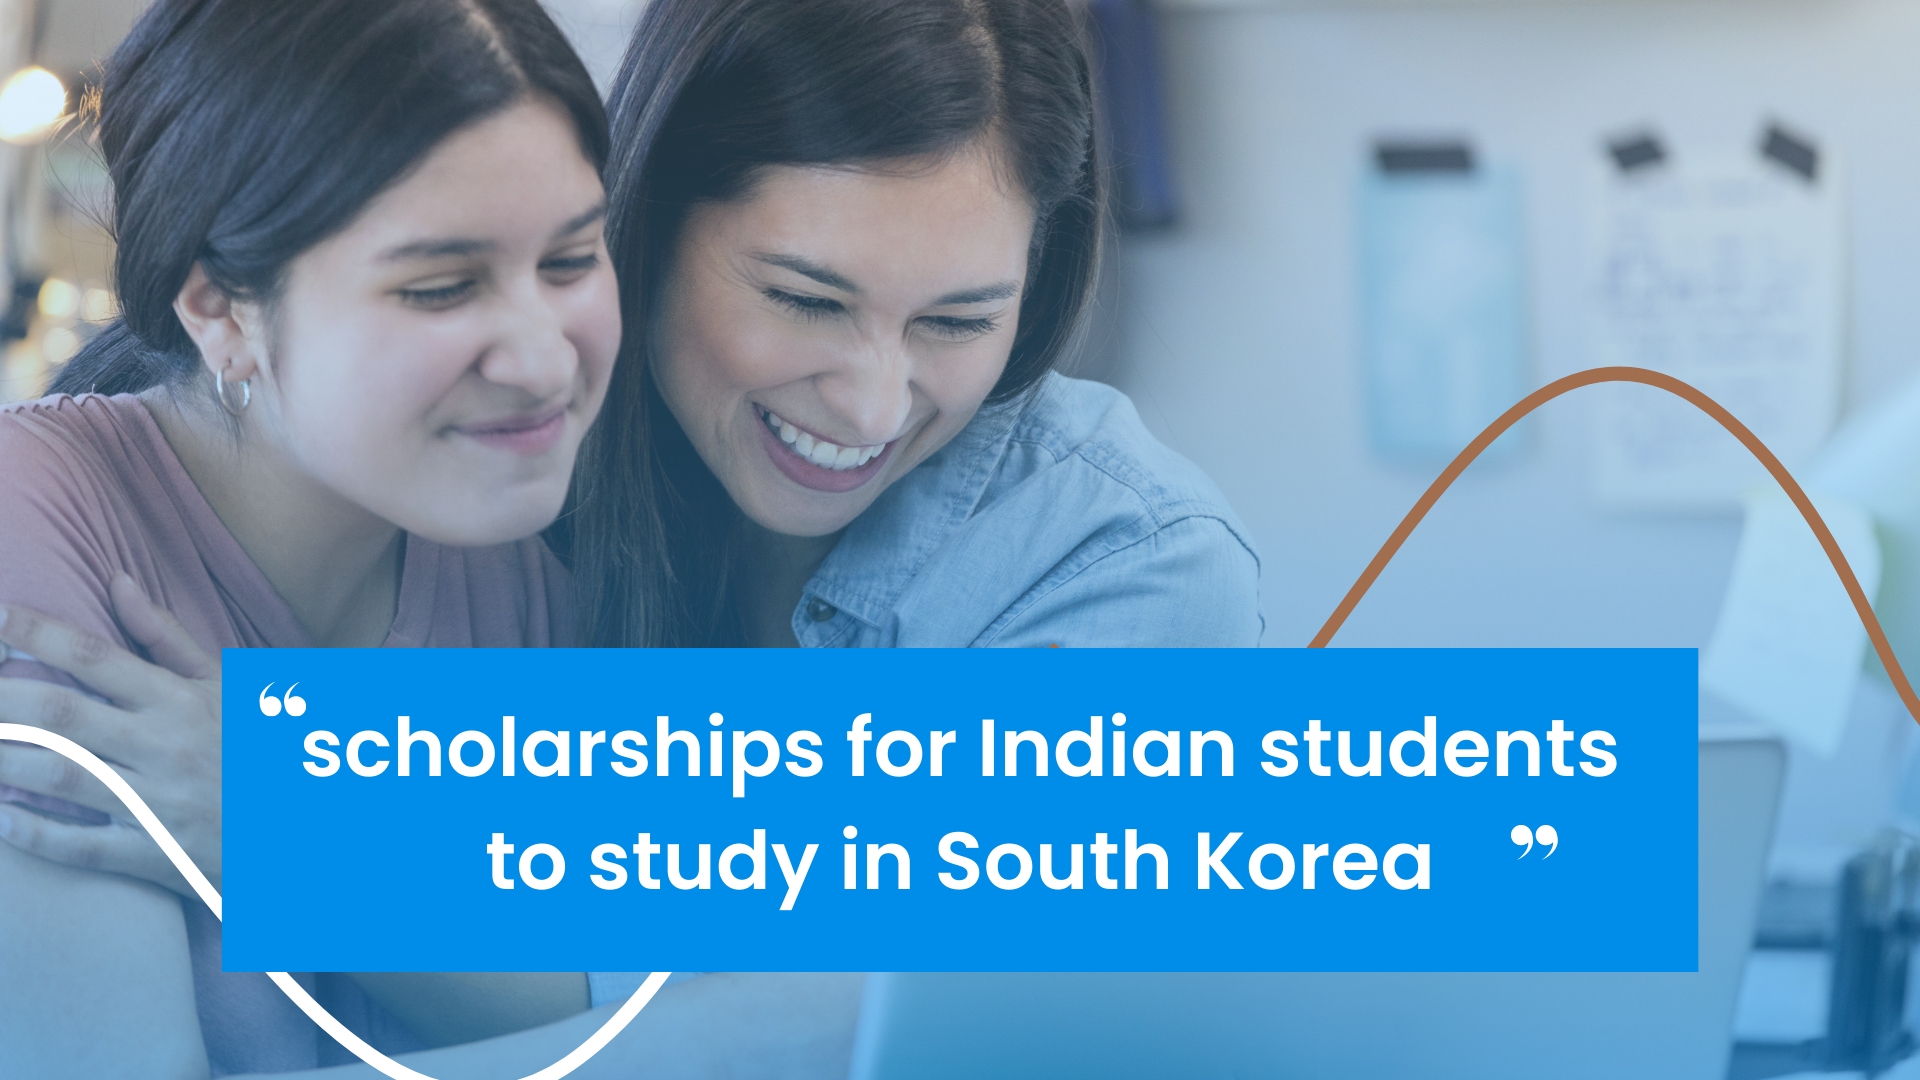 Scholarships for Indian students to study in South Korea